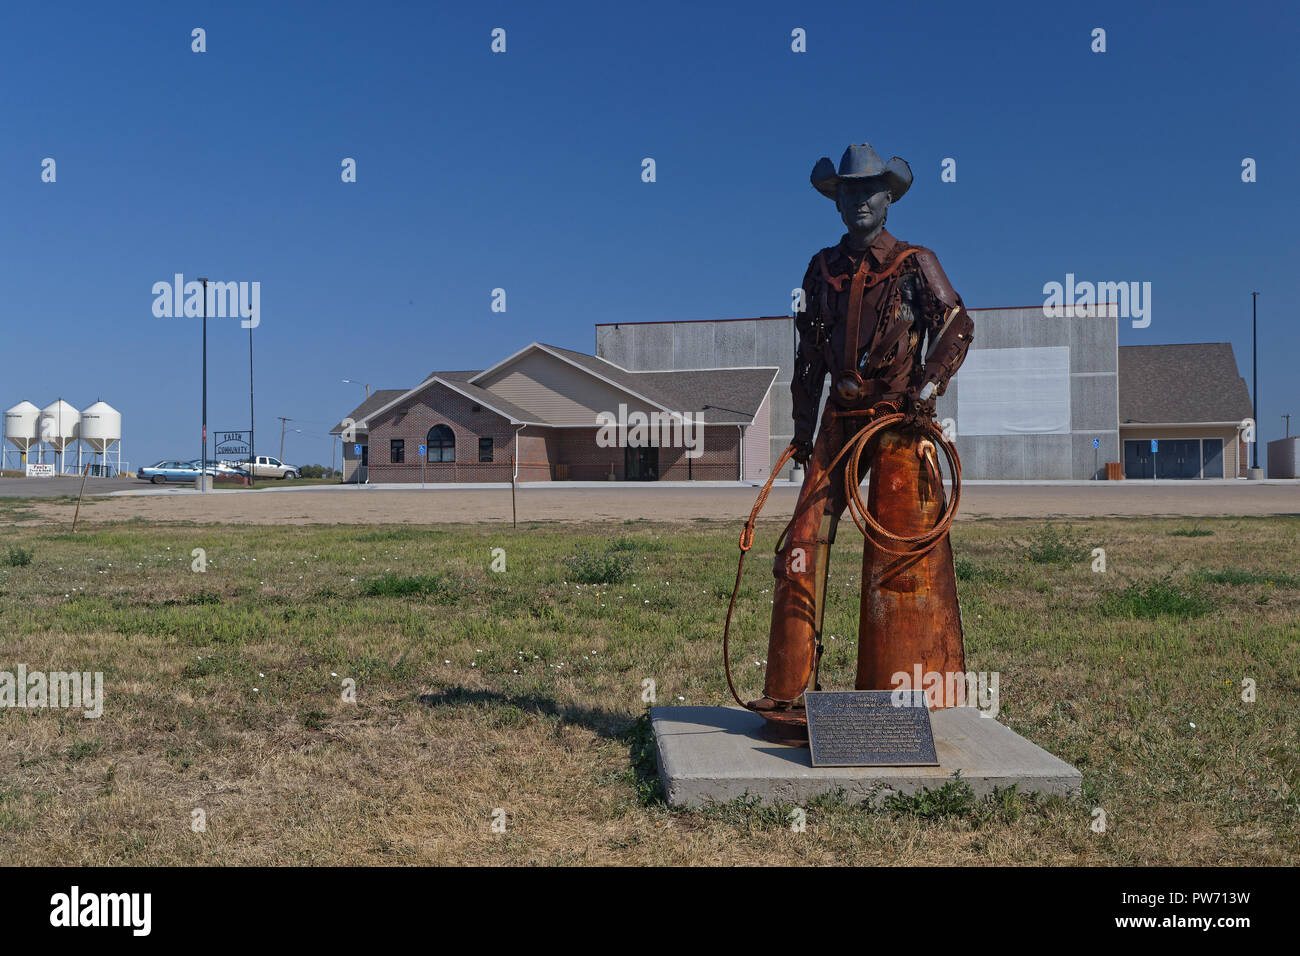 FAITH, SOUTH DAKOTA, September 7, 2018 : Steel statue of Bud Day a famous cowboy and rodeo competitor of South Dakota. Stock Photo